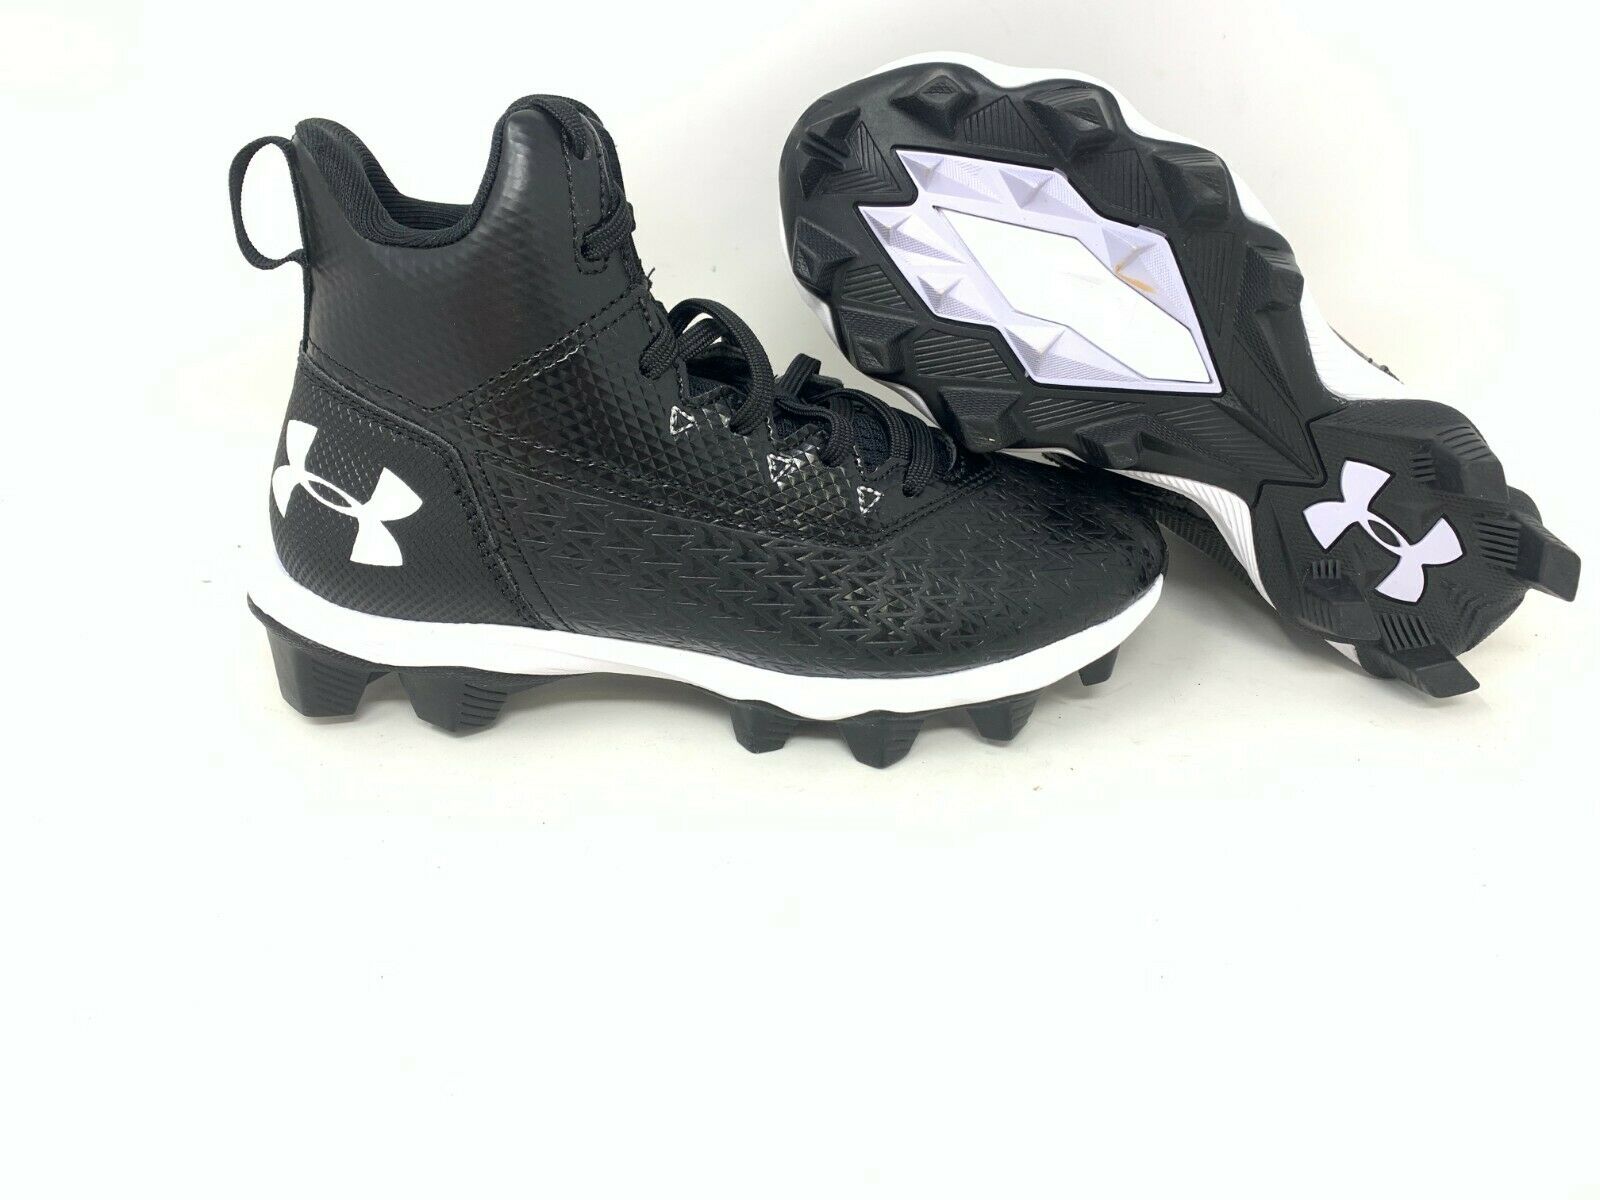 New! Under Armour Youth Boy's Hammer Mid Rm Football Cleats Blk/wht #30212 1c Tz